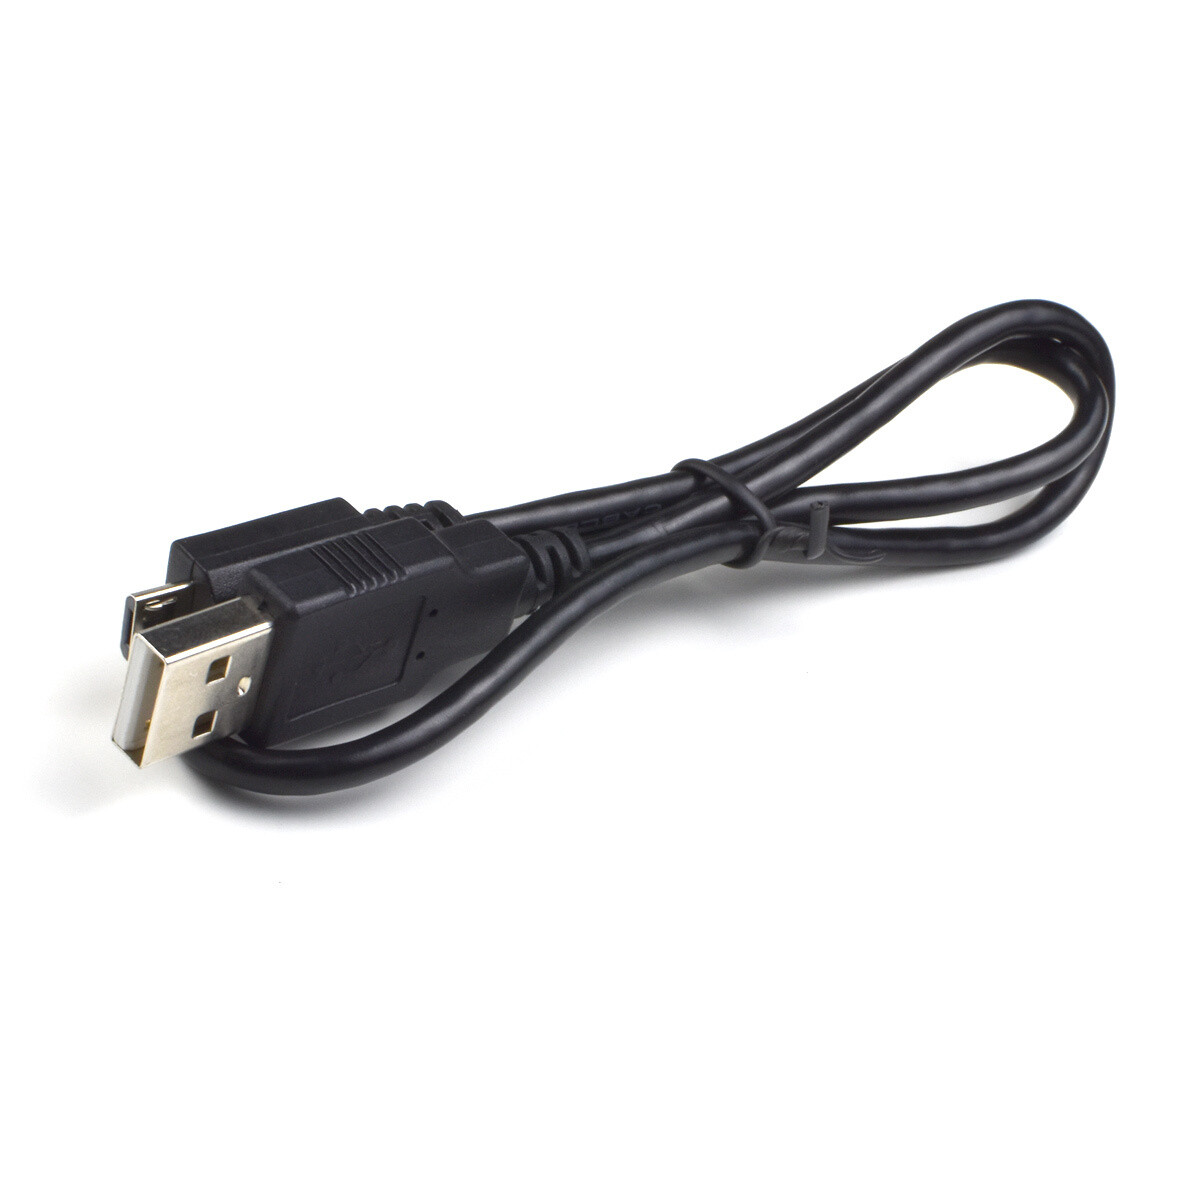 USB A to USB micro B cable, 1.5'